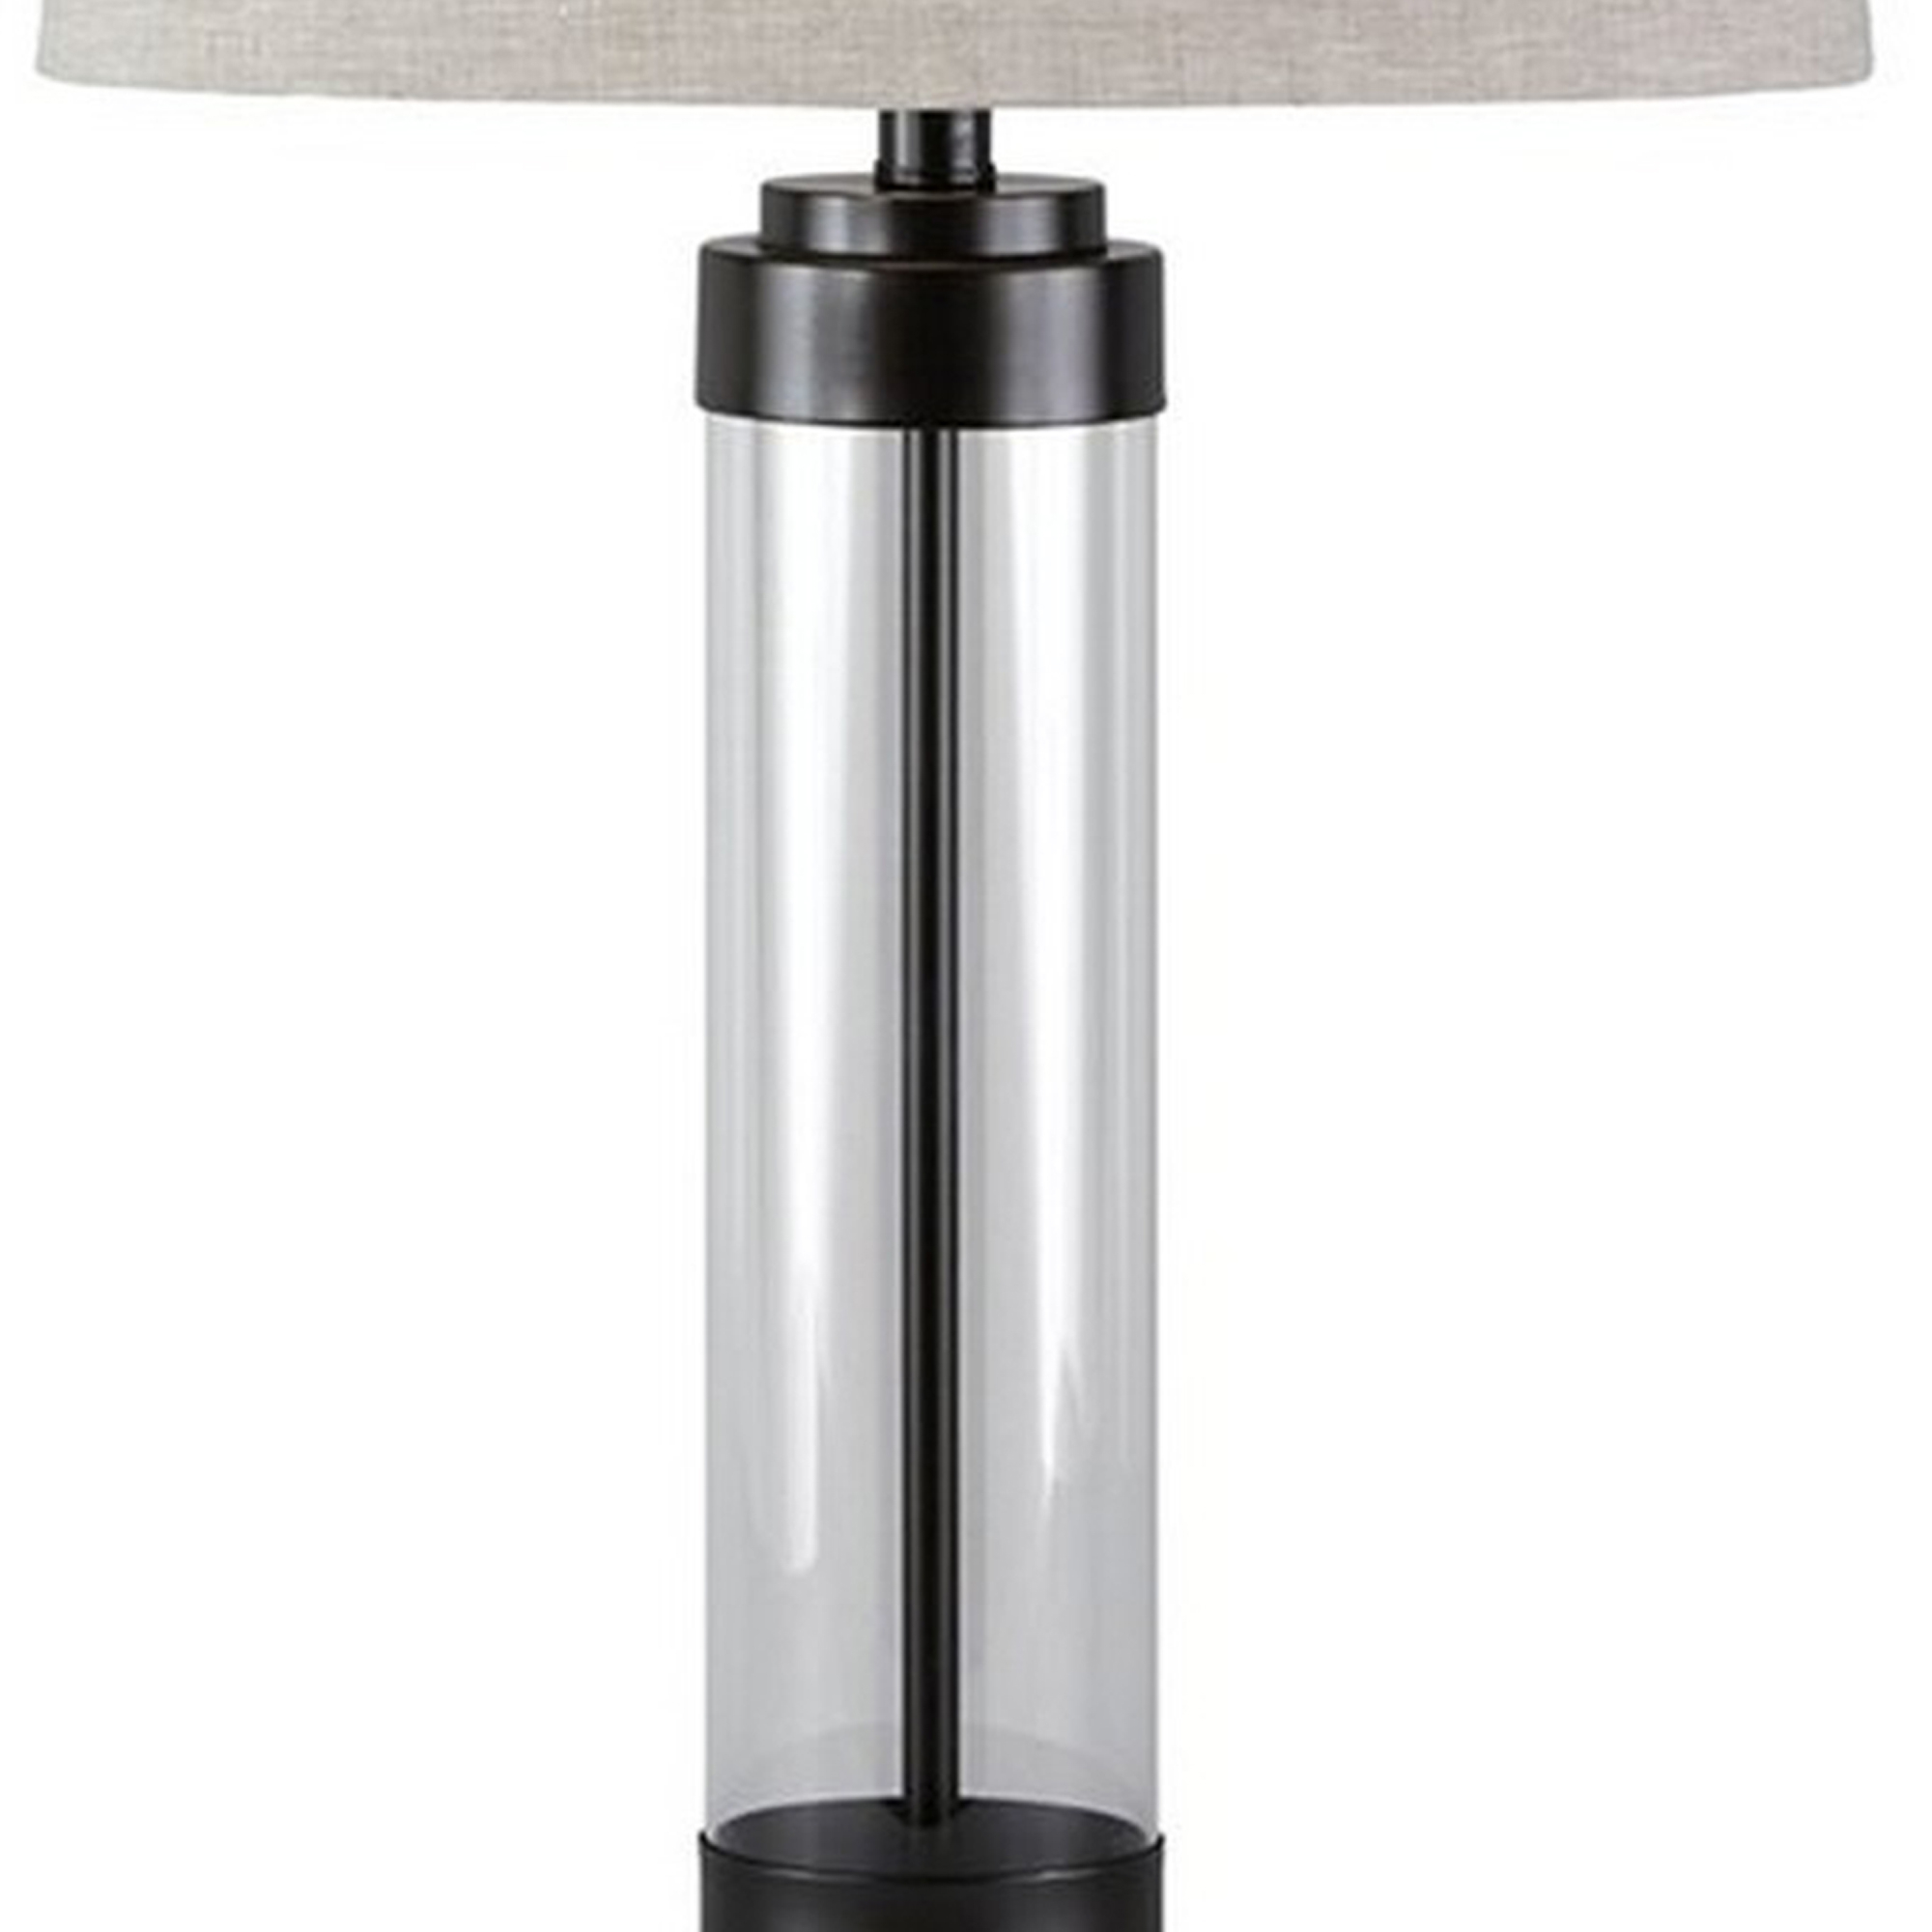 Glass And Metal Frame Table Lamp With Fabric Shade, Gray And Black- Saltoro Sherpi